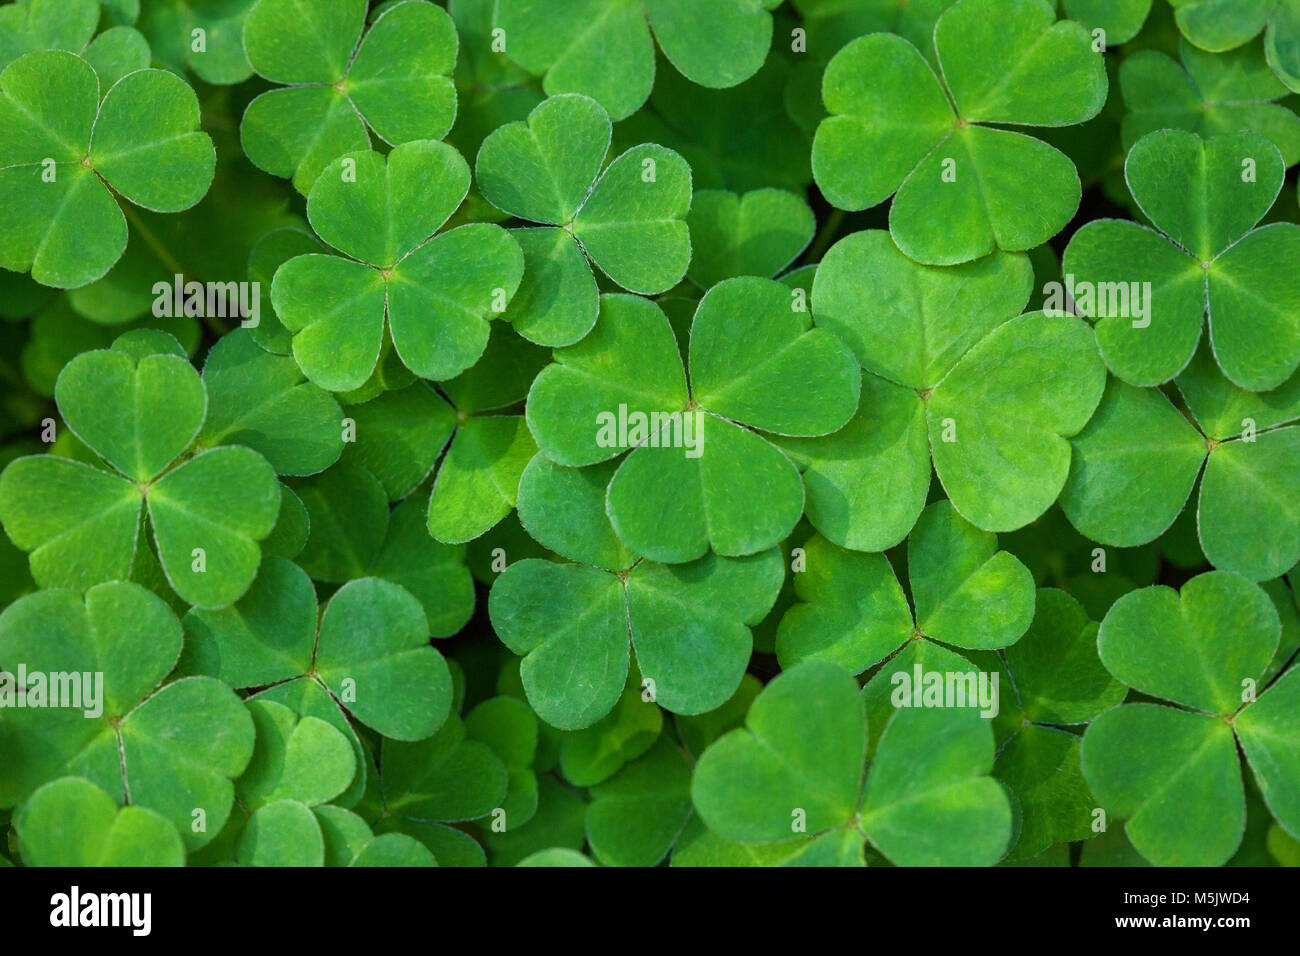 Green background with three-leaved shamrocks. St. Patrick's day holiday symbol.  Shallow DOF. Selective focus. Stock Photo